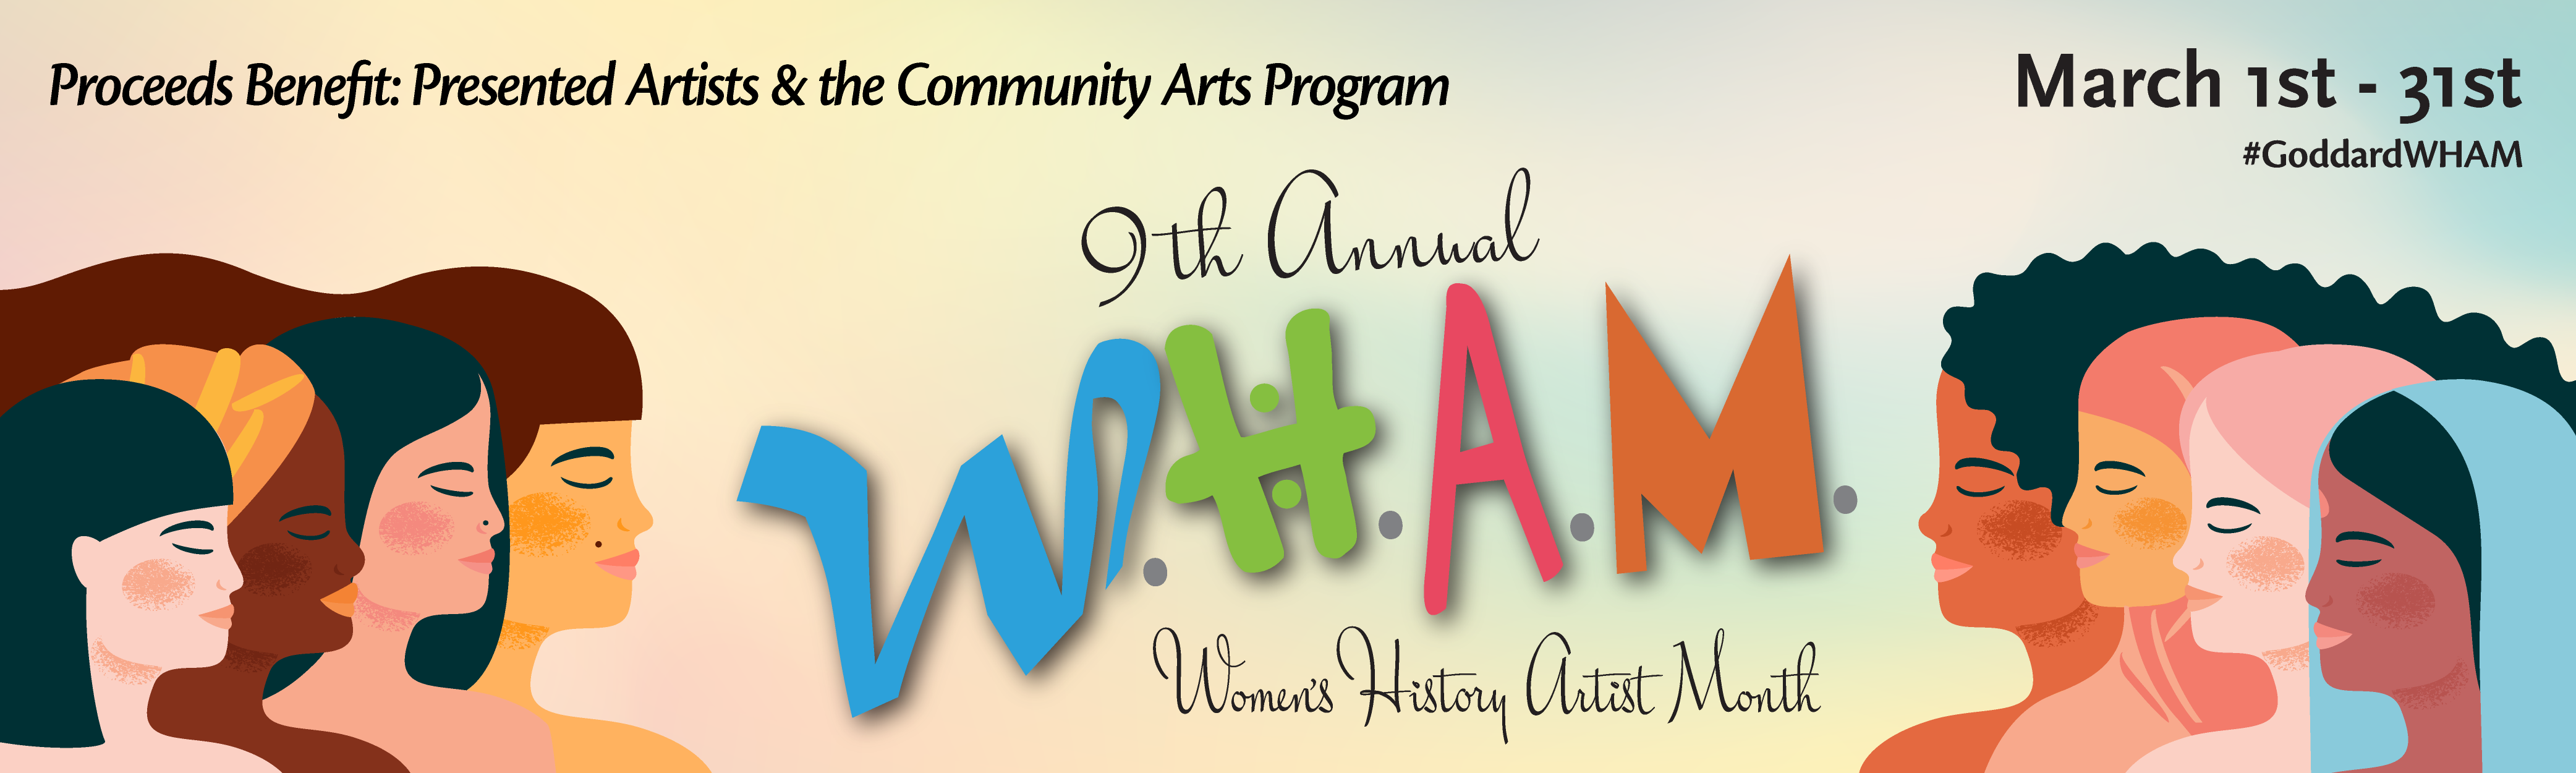 9th Annual Women's History Artists Month from March 1st to 31st.